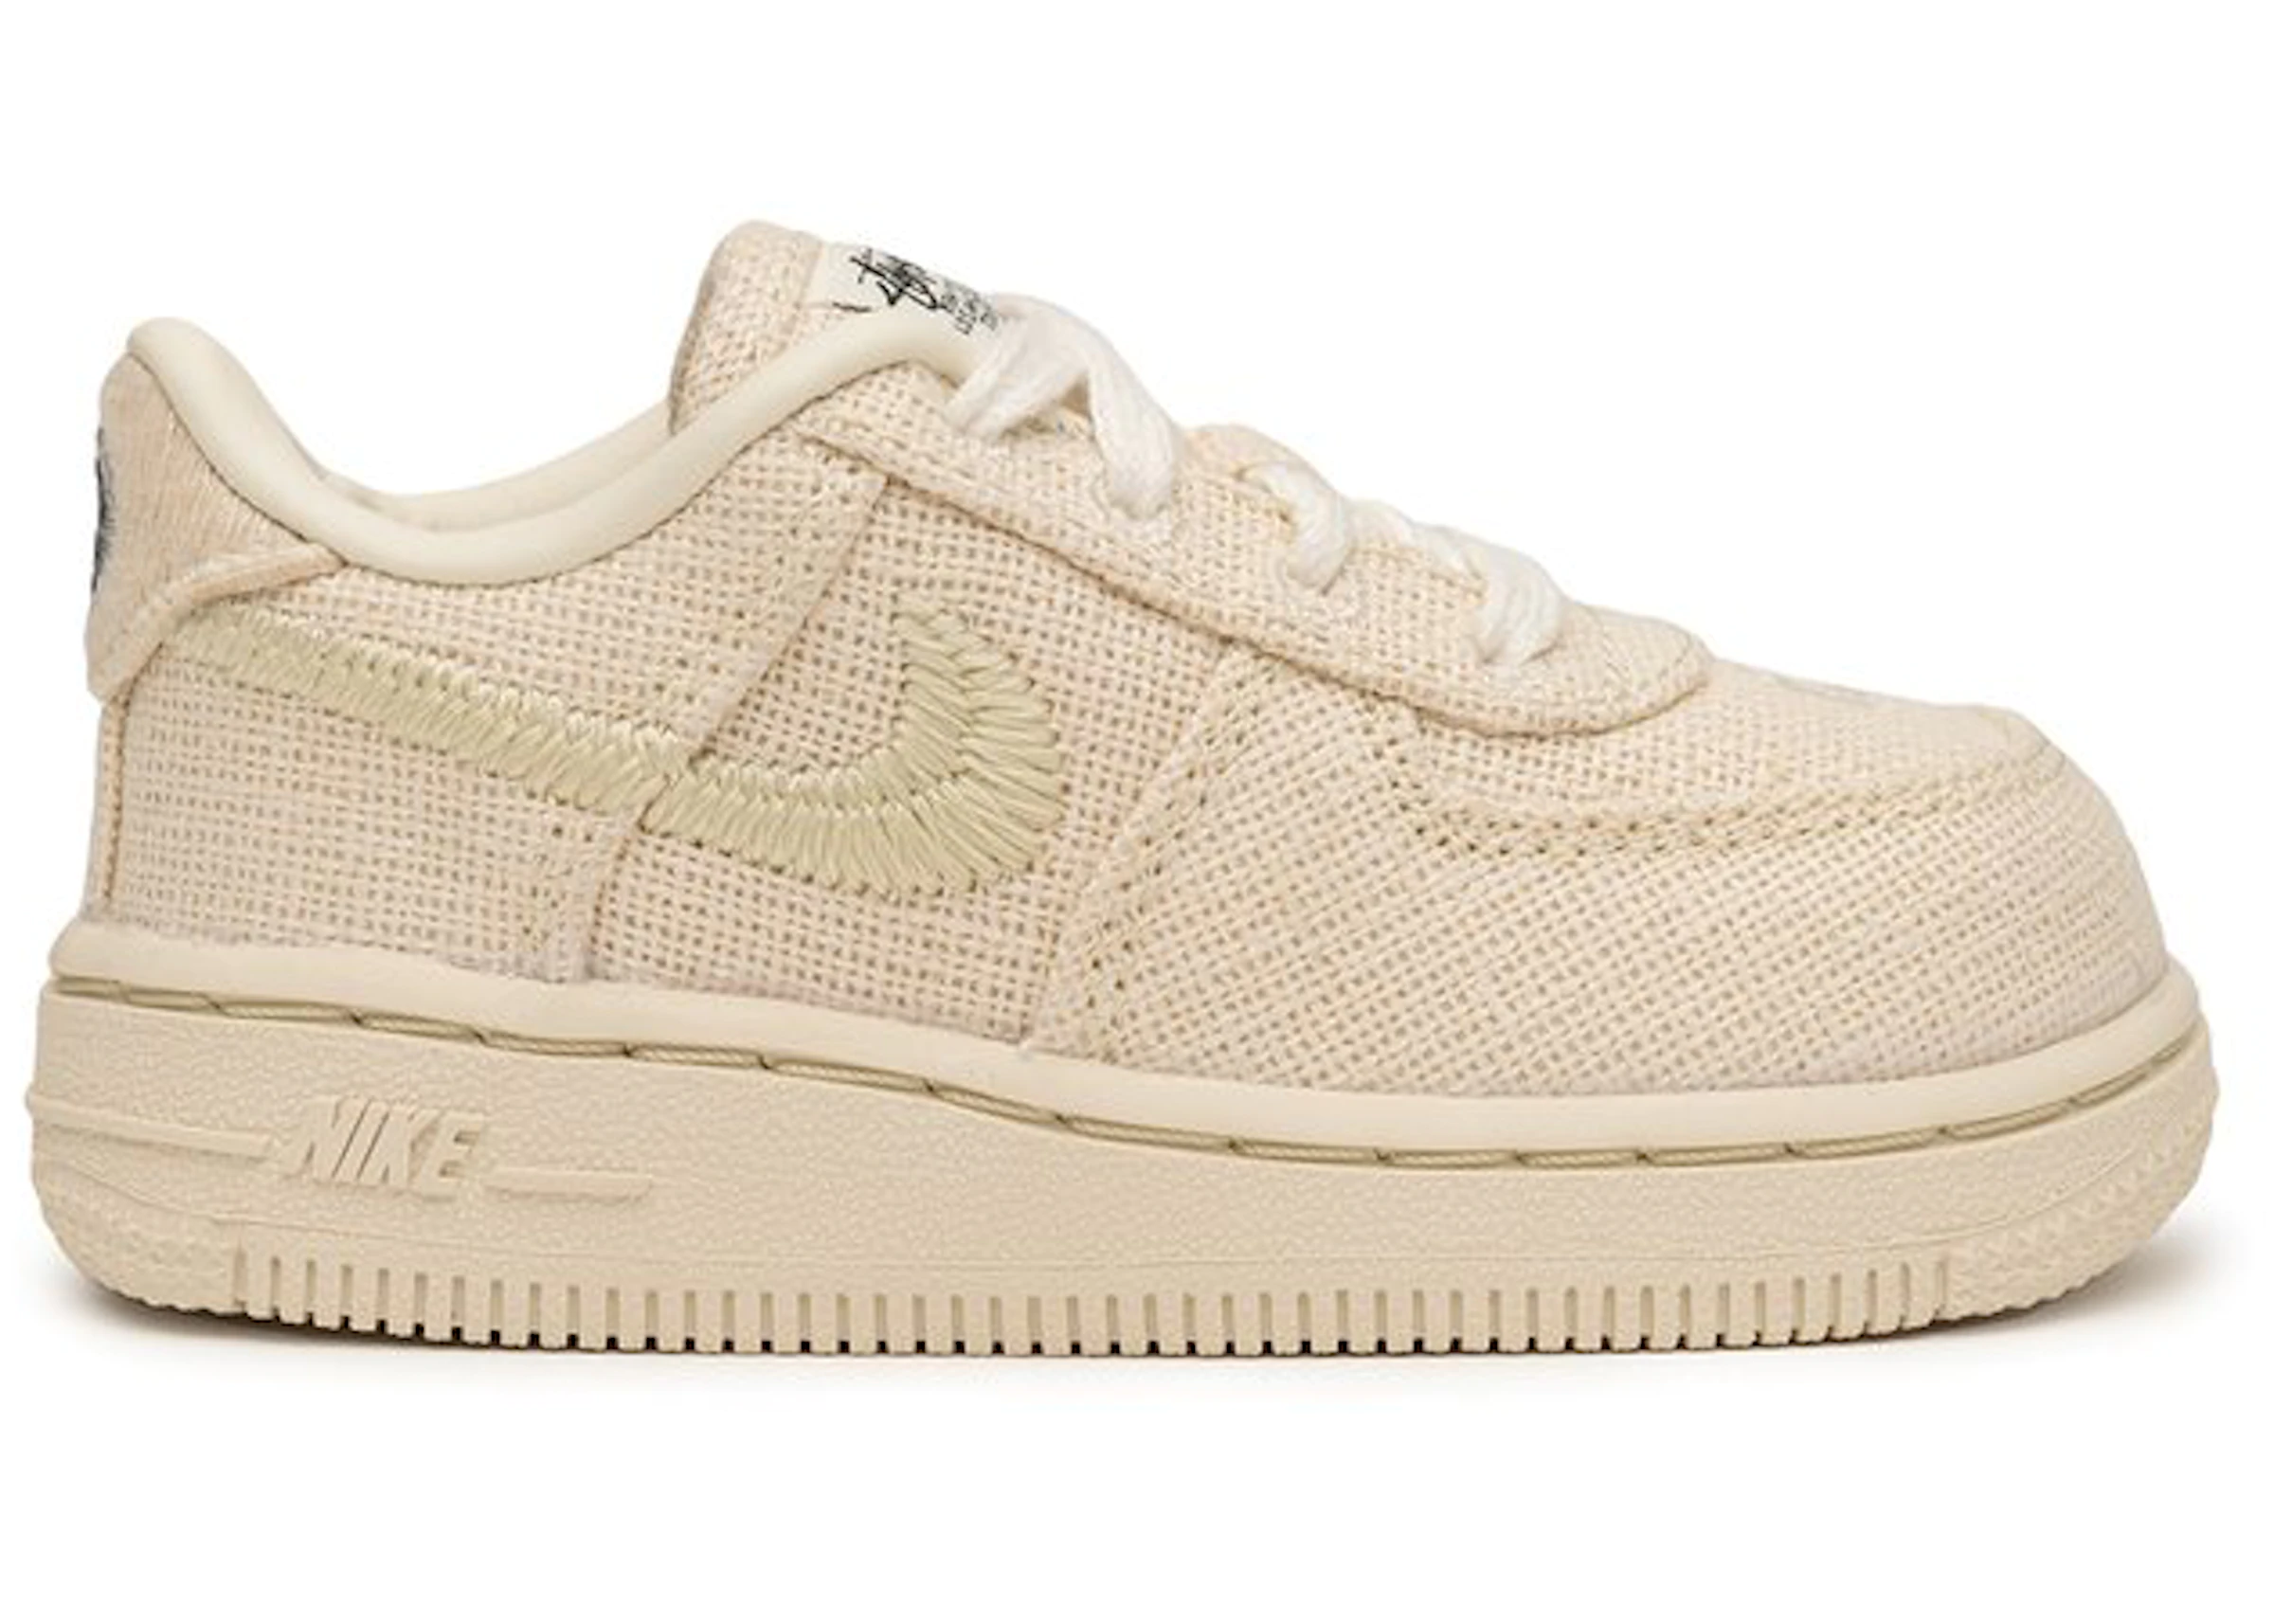 Nike Air Force 1 Low Stussy Fossil (TD)